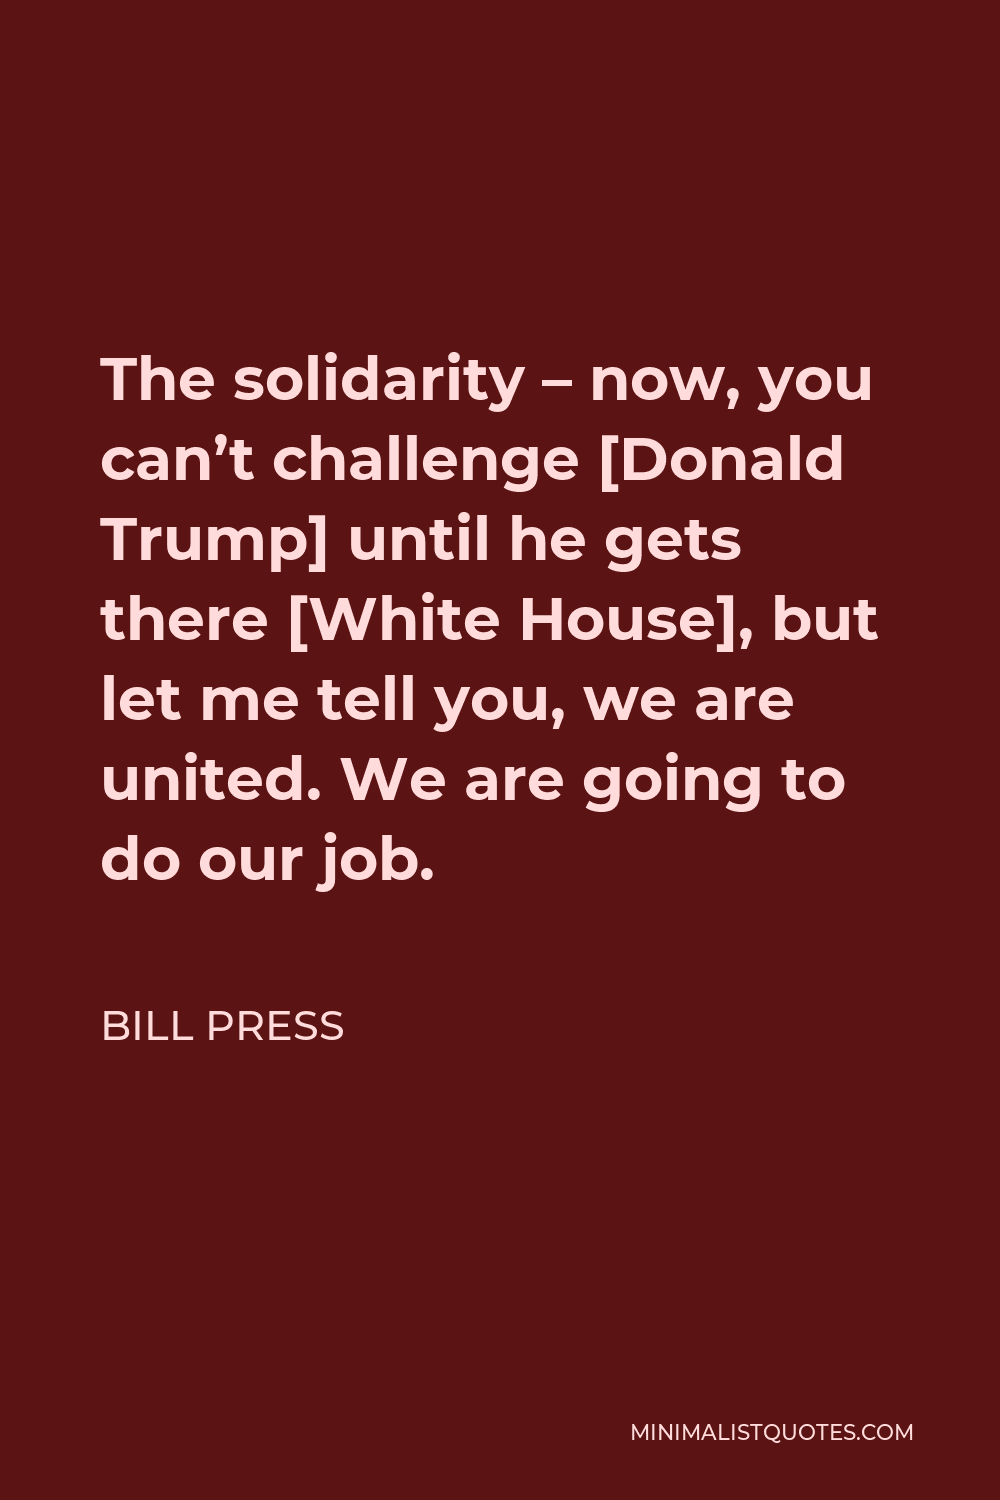 Bill Press Quote - The solidarity – now, you can’t challenge [Donald Trump] until he gets there [White House], but let me tell you, we are united. We are going to do our job.